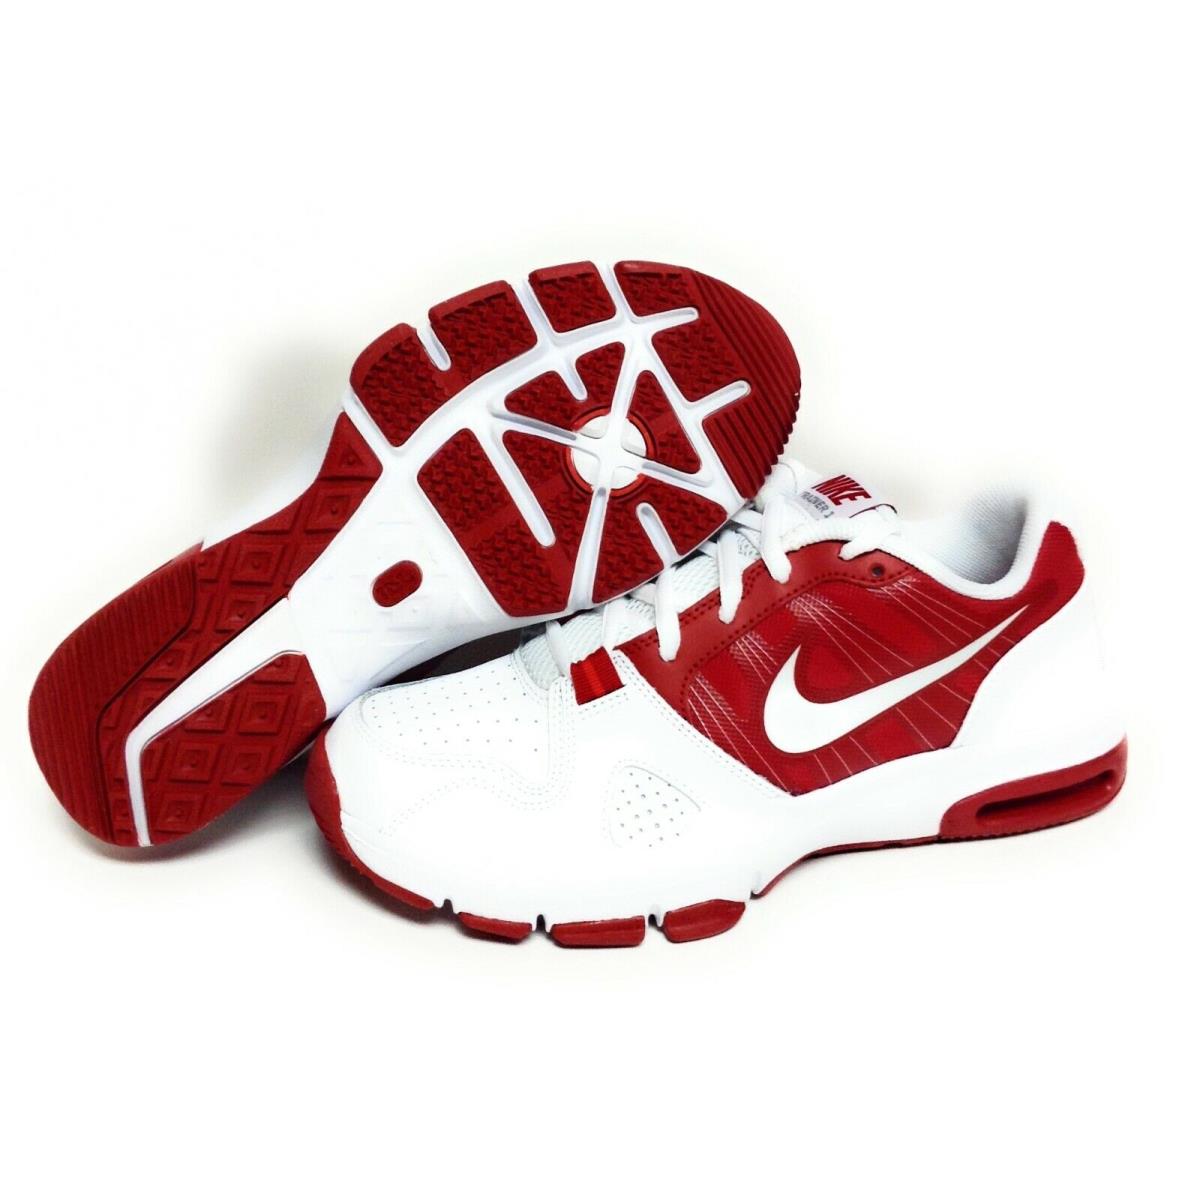 Mens Nike Trainer 1.2 Low 431848 161 White Red 2011 Deadstock Sneakers Shoes - White , White Manufacturer